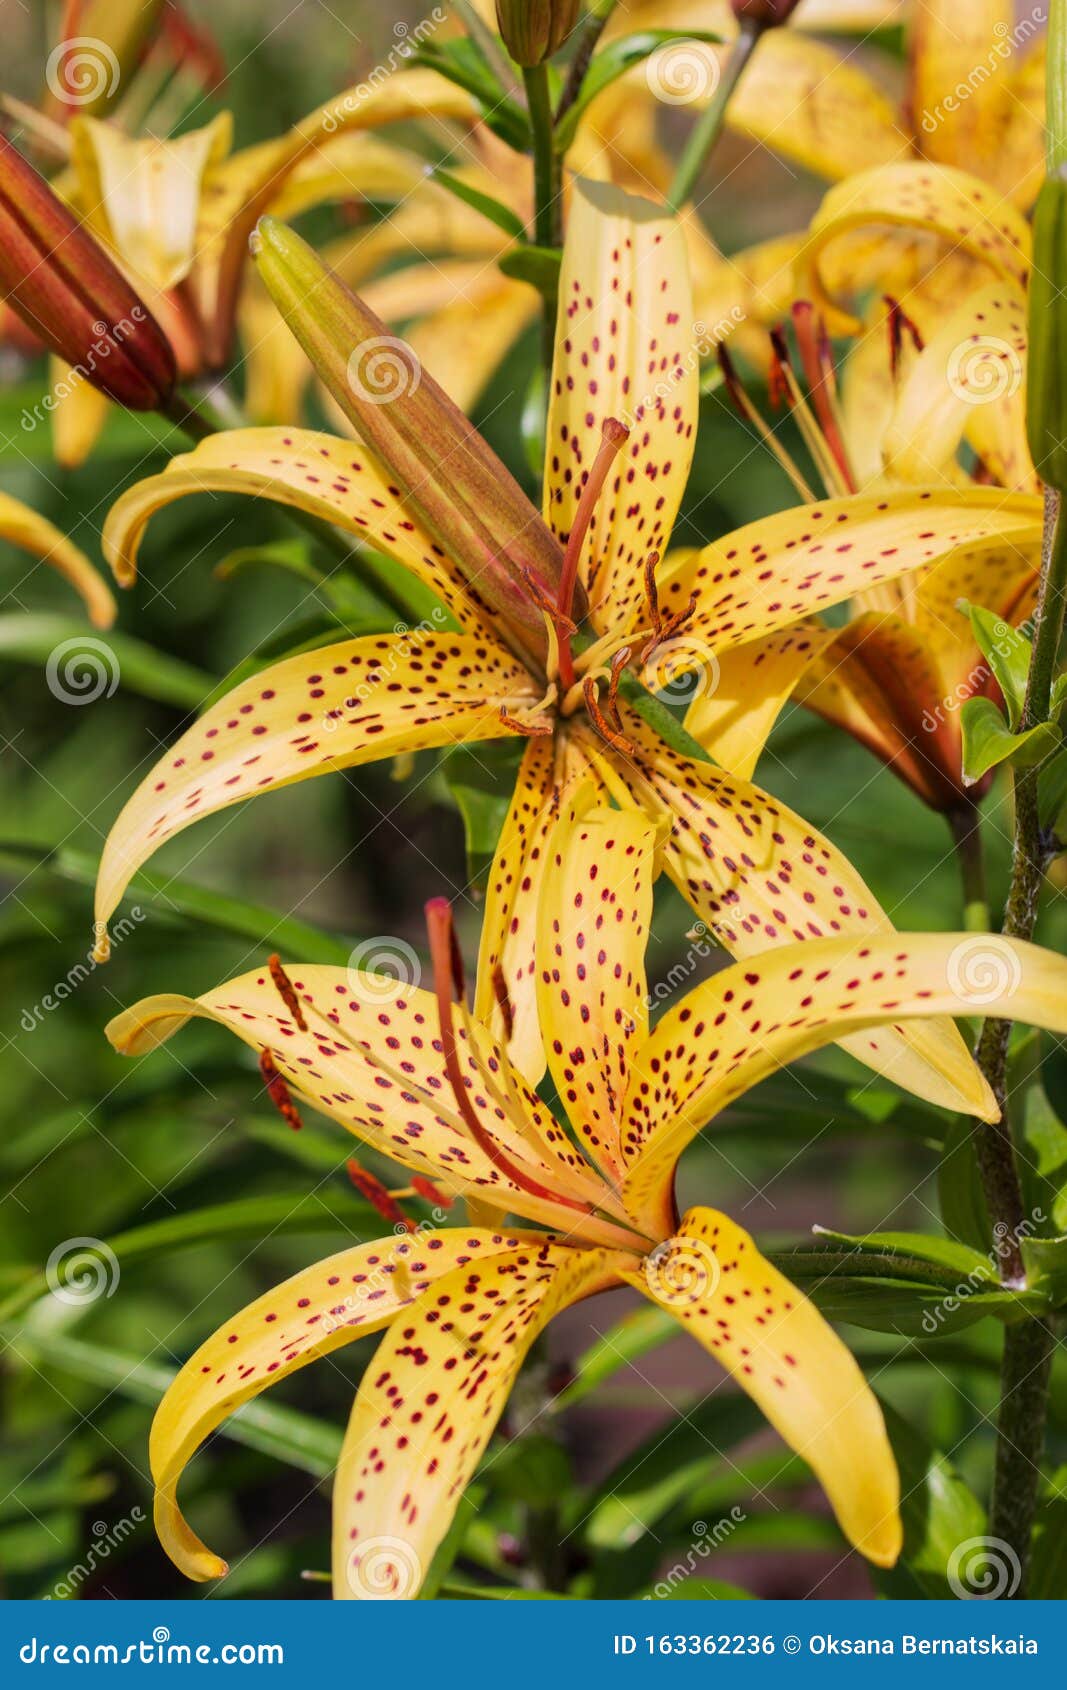 Yellow Lily Flower with Red Spots Stock Photo - Image of background ...